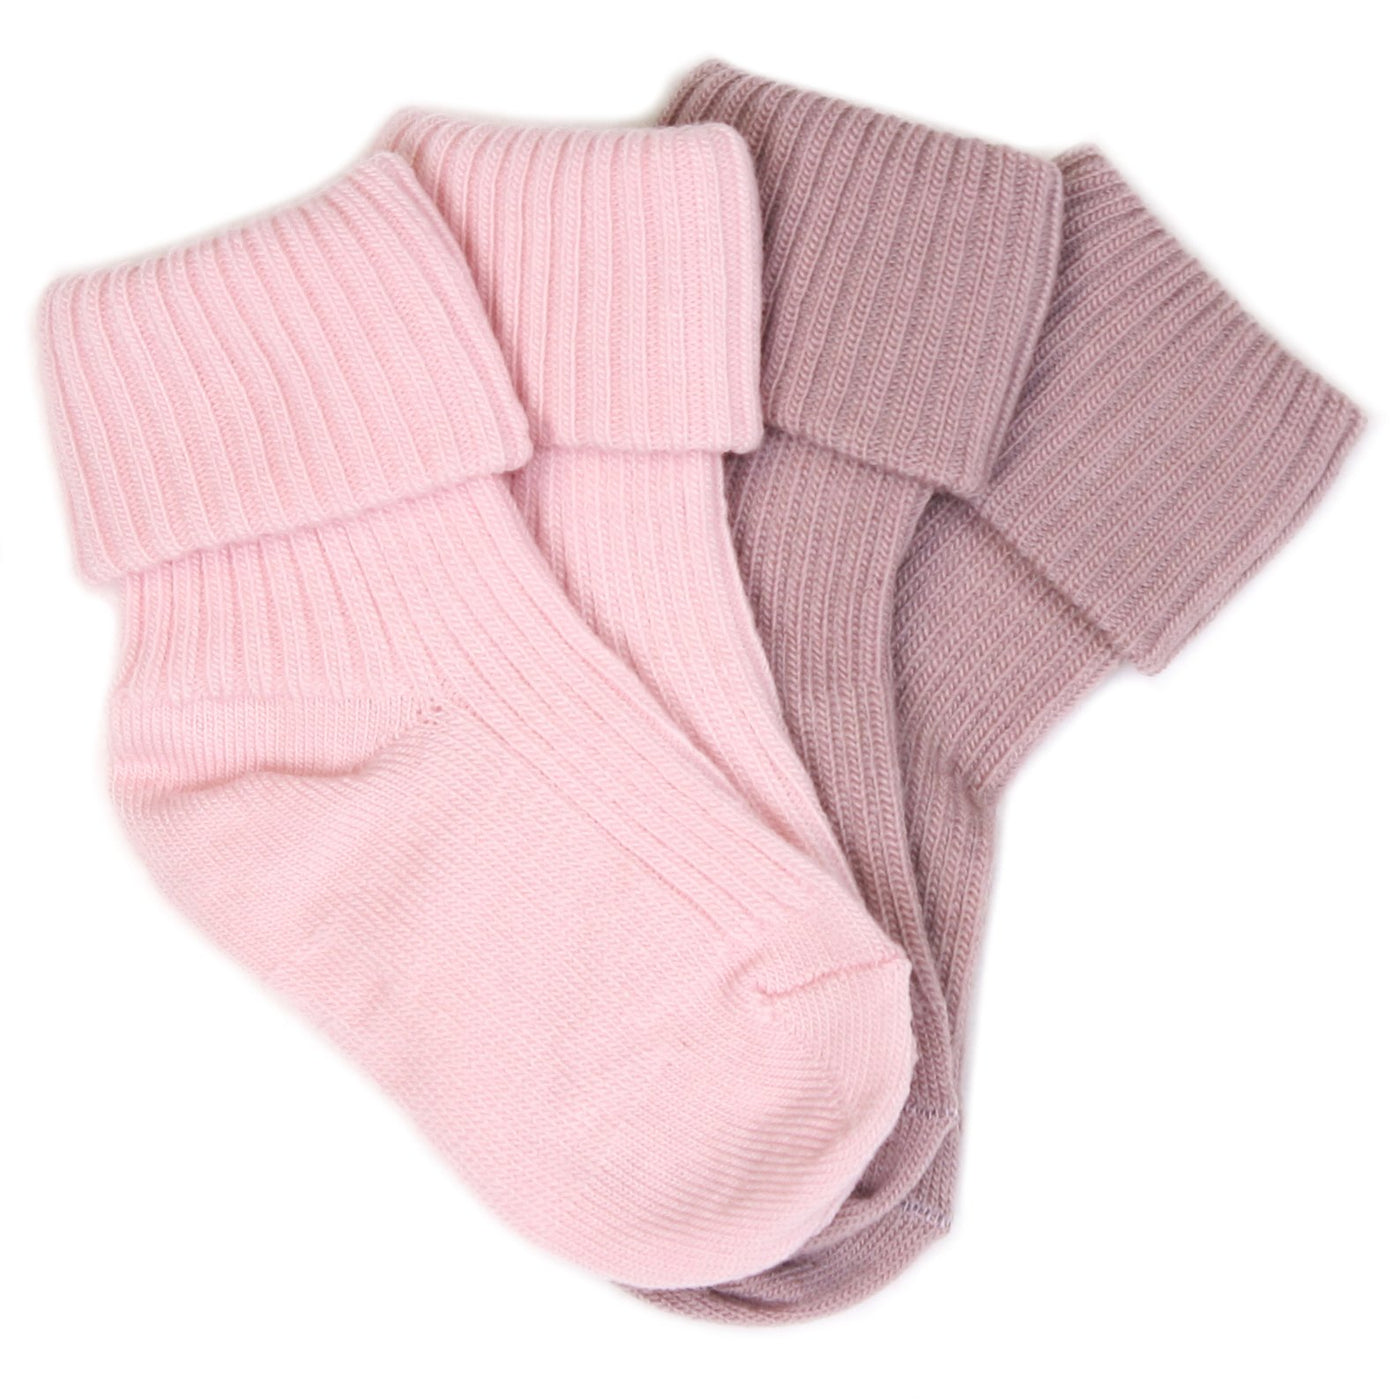 Imperfect Wool Socks, Baby and Toddler, Pink & Rose - TWO PAIR PACK (discontinued)